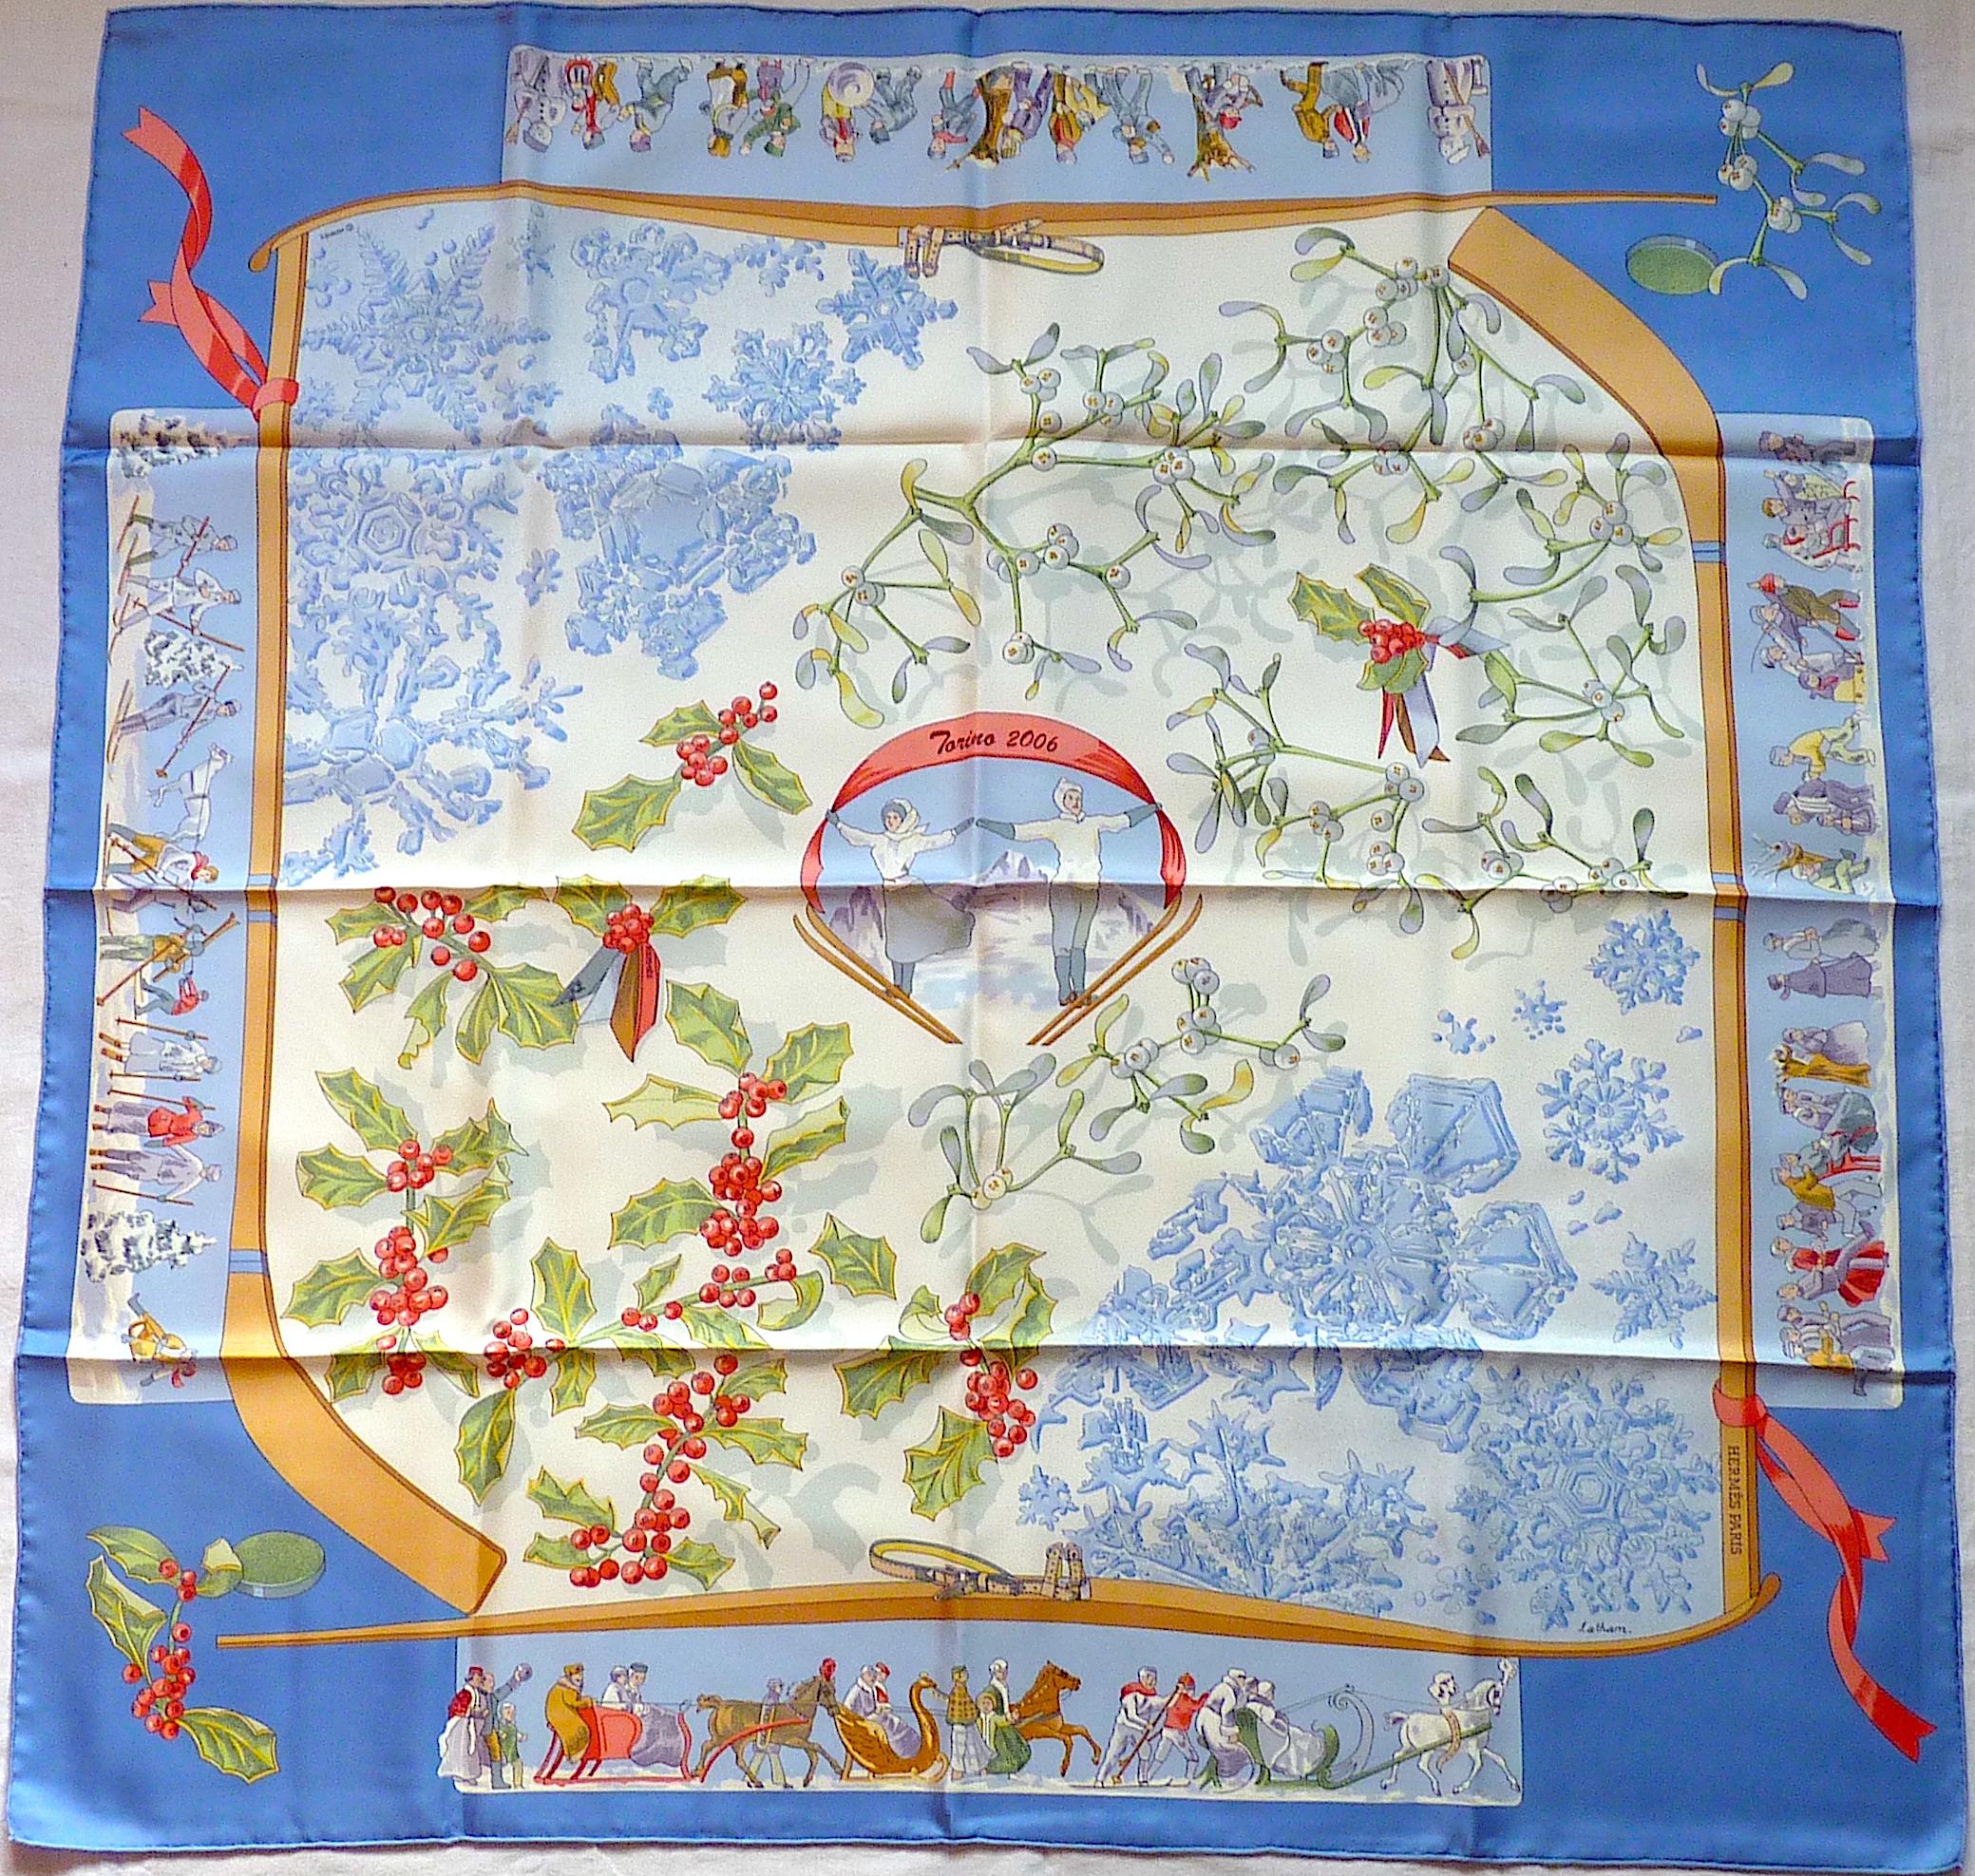 This is a very rare Hermes Scarf Special Edition for Winter Olympic Games in Torino in 2006, Perfect Condition, Unworn ! A delightful sky blue margin, and ice blue pattern, cream white background

The pattern is Neige D'Antan by Caty Latham, but the